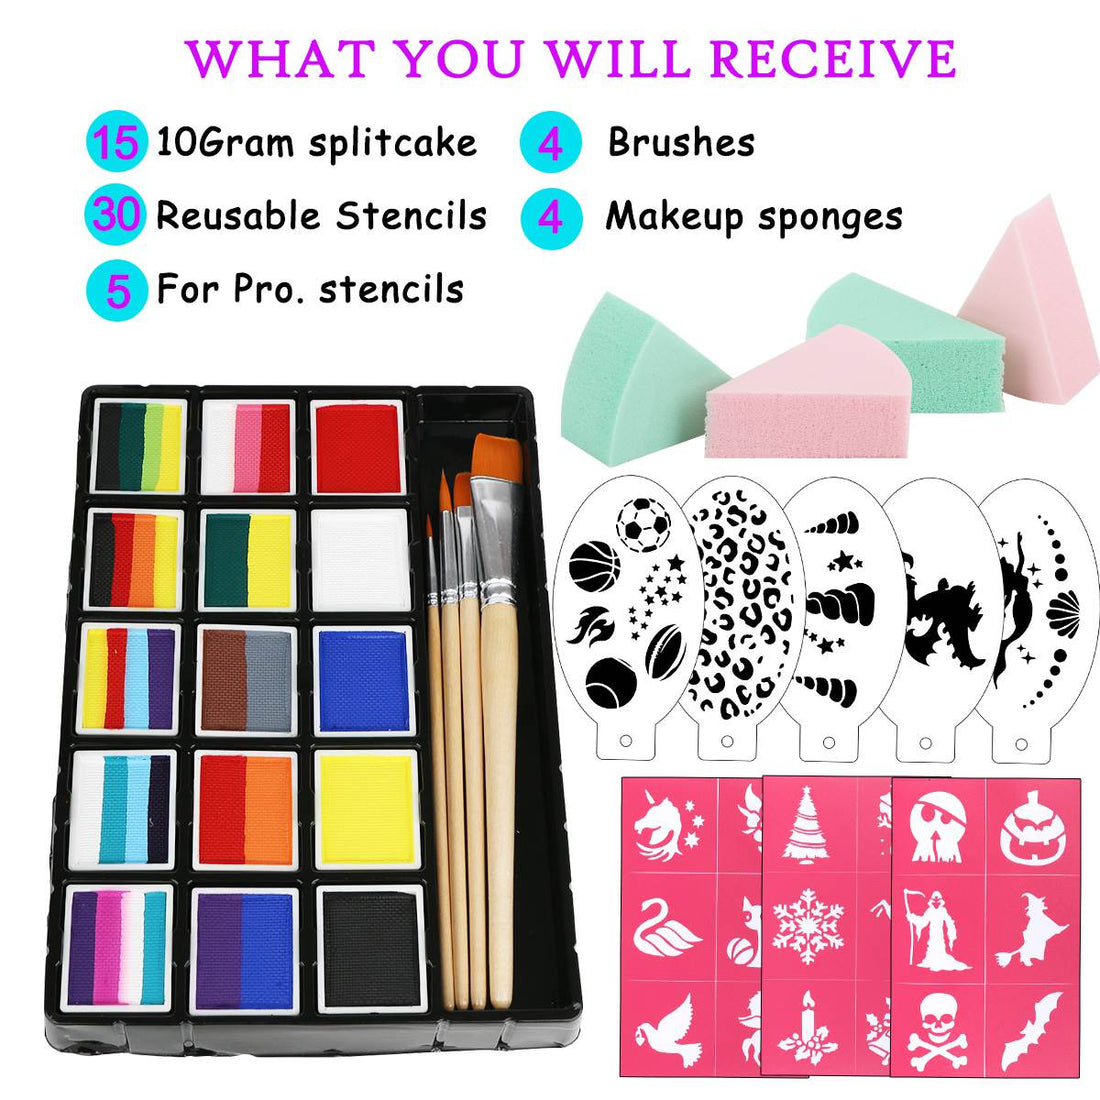 Tomshine Professional Face & Body Painting Kit 10 Colors Rainbow Water  Activated Paints Split Cakes Palette Makeup Facepaints with Brush &  Hypoallergenic for Costume Party Festival Art Supplies 